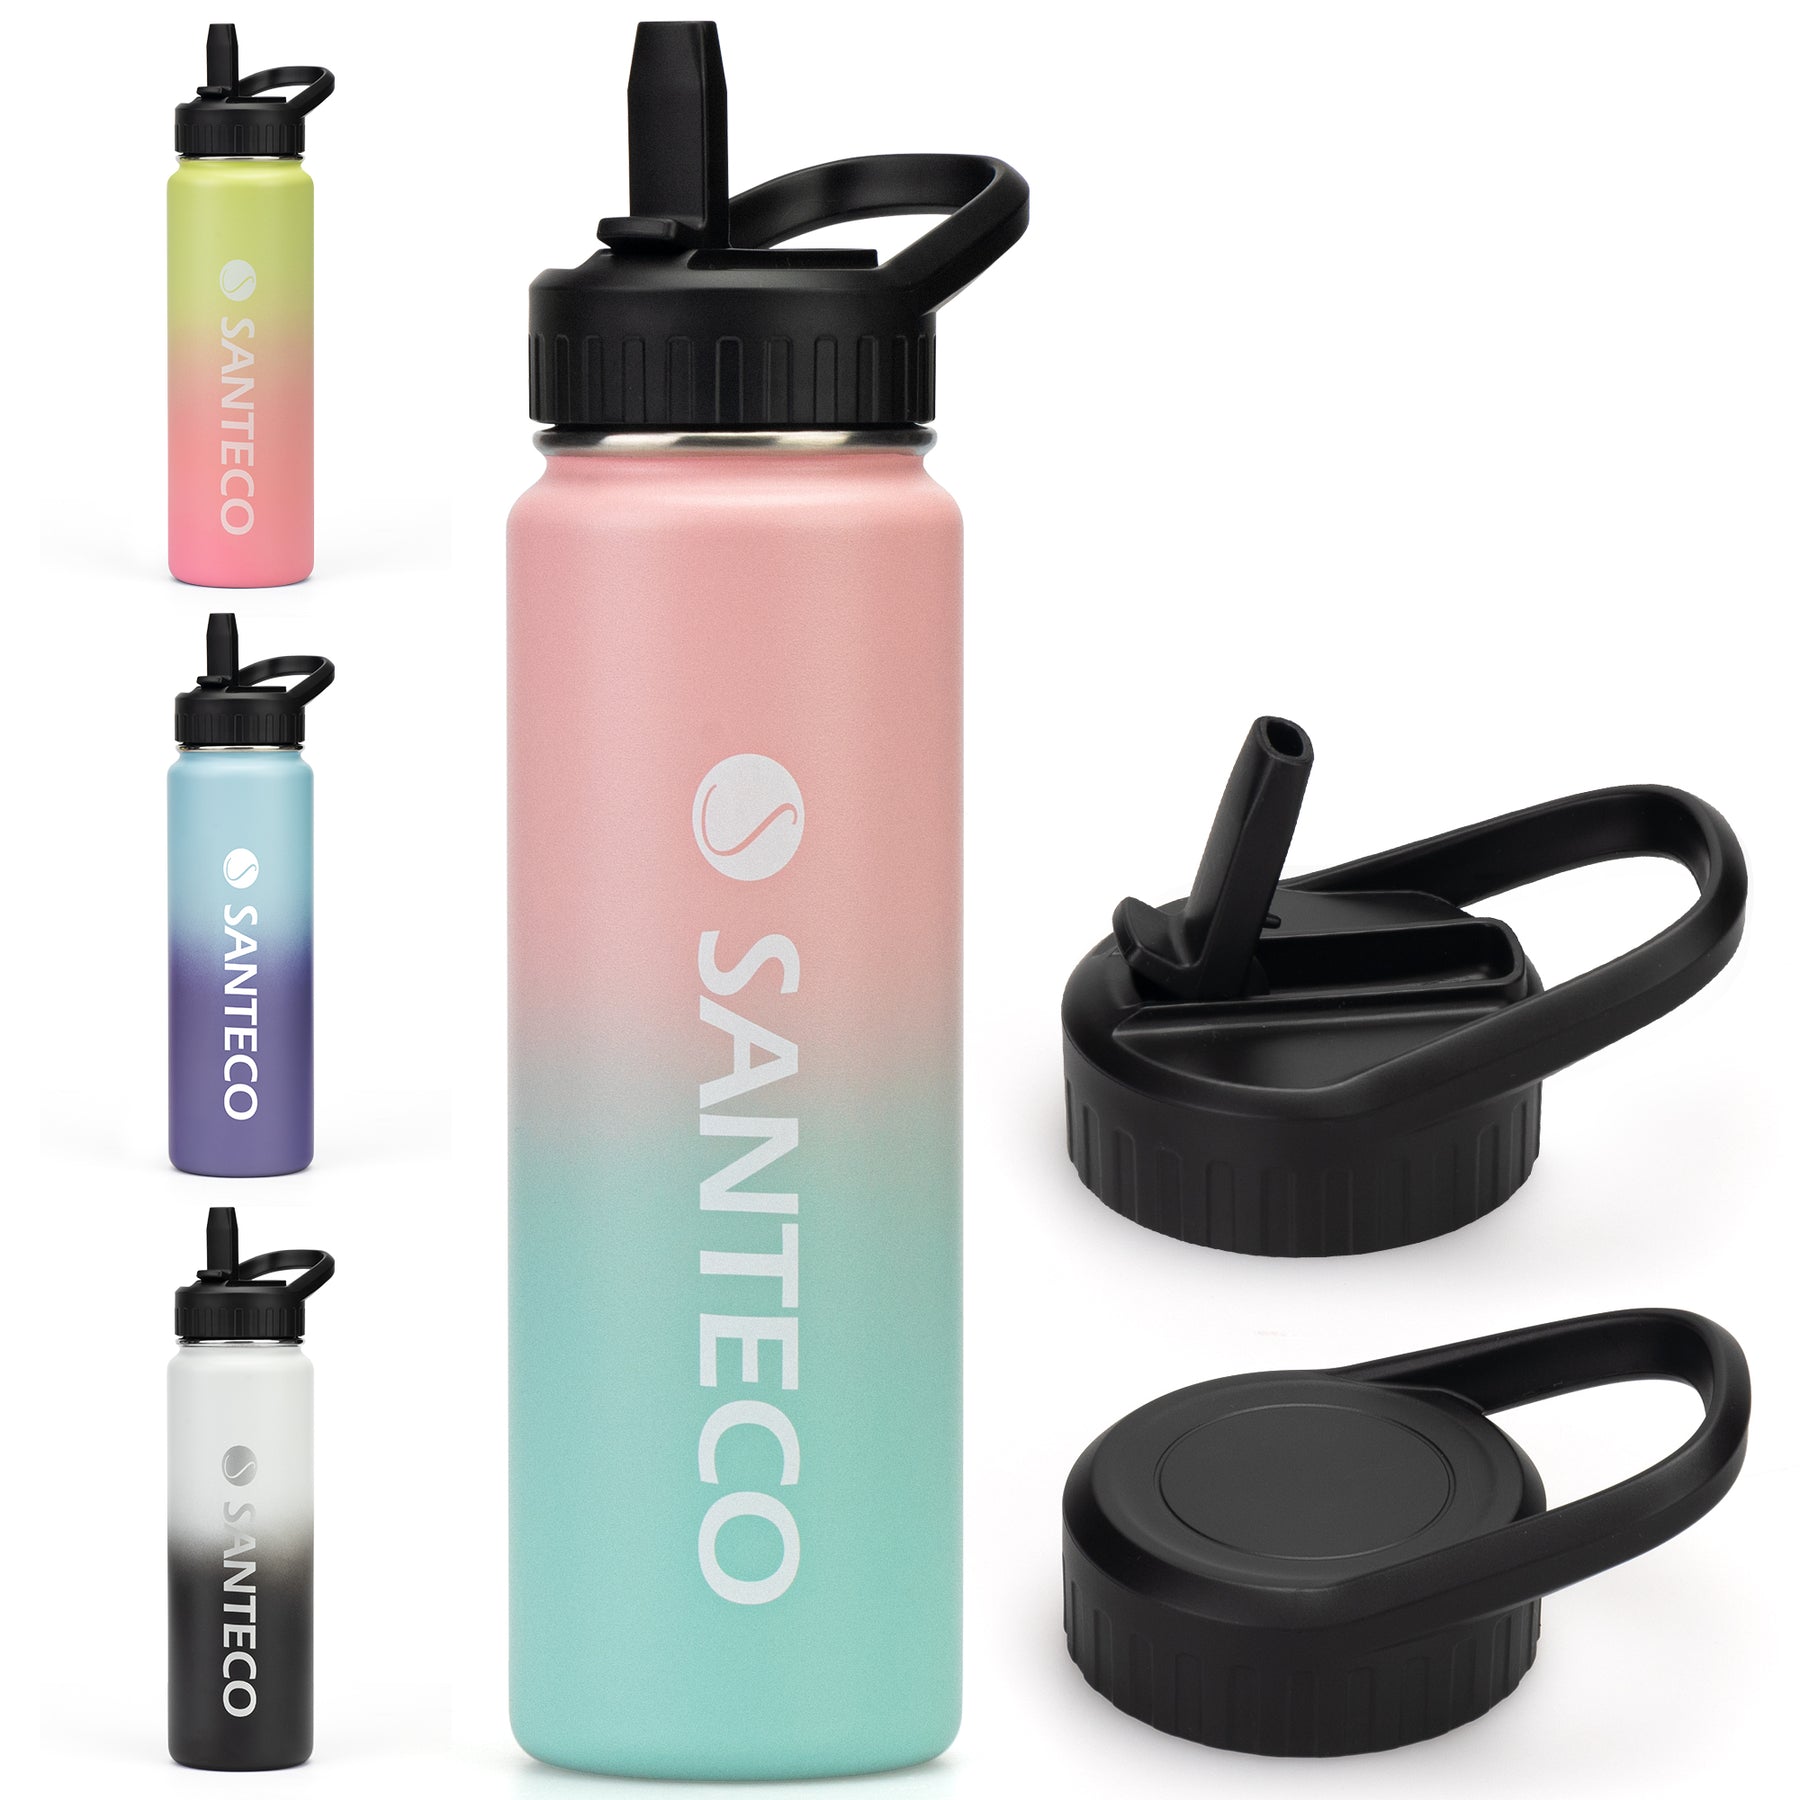 SANTECO water bottle 24 oz (about 680.4 ml), vacuum insulation stainless steel bottle, with straw handle cap, leak-proof bottle, wide mouth and easy to clean, thermal insulation, suitable for gym, camping, hiking